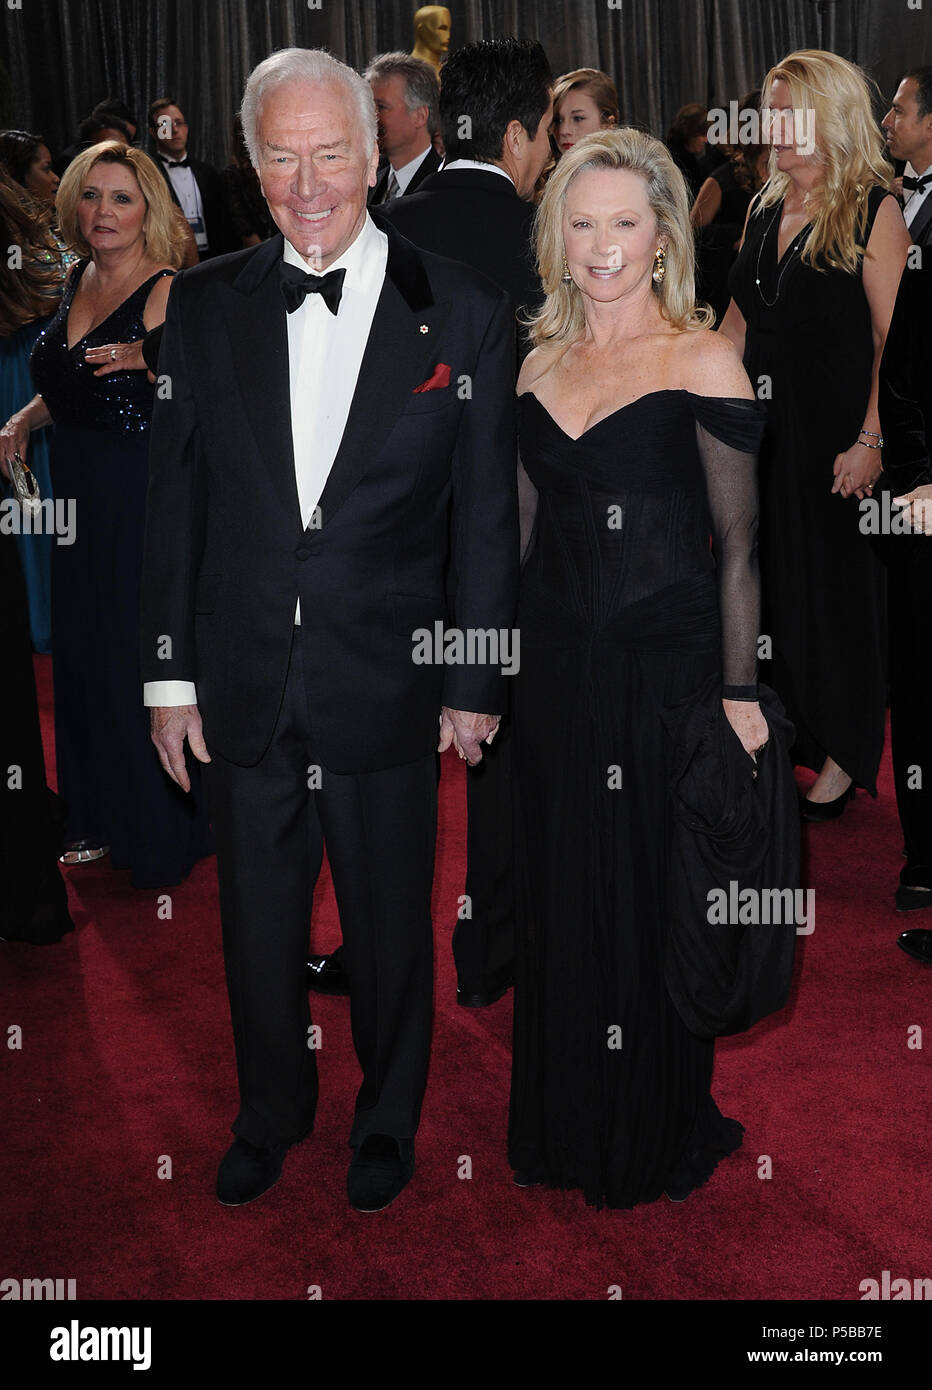 Christopher Plummer and wife  108 arriving at the 85th Academy Awards 2013 - Oscars - at the Dolby Theatre in Los Angeles.Christopher Plummer and wife  108 ------------- Red Carpet Event, Vertical, USA, Film Industry, Celebrities,  Photography, Bestof, Arts Culture and Entertainment, Topix Celebrities fashion /  Vertical, Best of, Event in Hollywood Life - California,  Red Carpet and backstage, USA, Film Industry, Celebrities,  movie celebrities, TV celebrities, Music celebrities, Photography, Bestof, Arts Culture and Entertainment,  Topix, vertical,  family from from the year , 2013, inquiry  Stock Photo